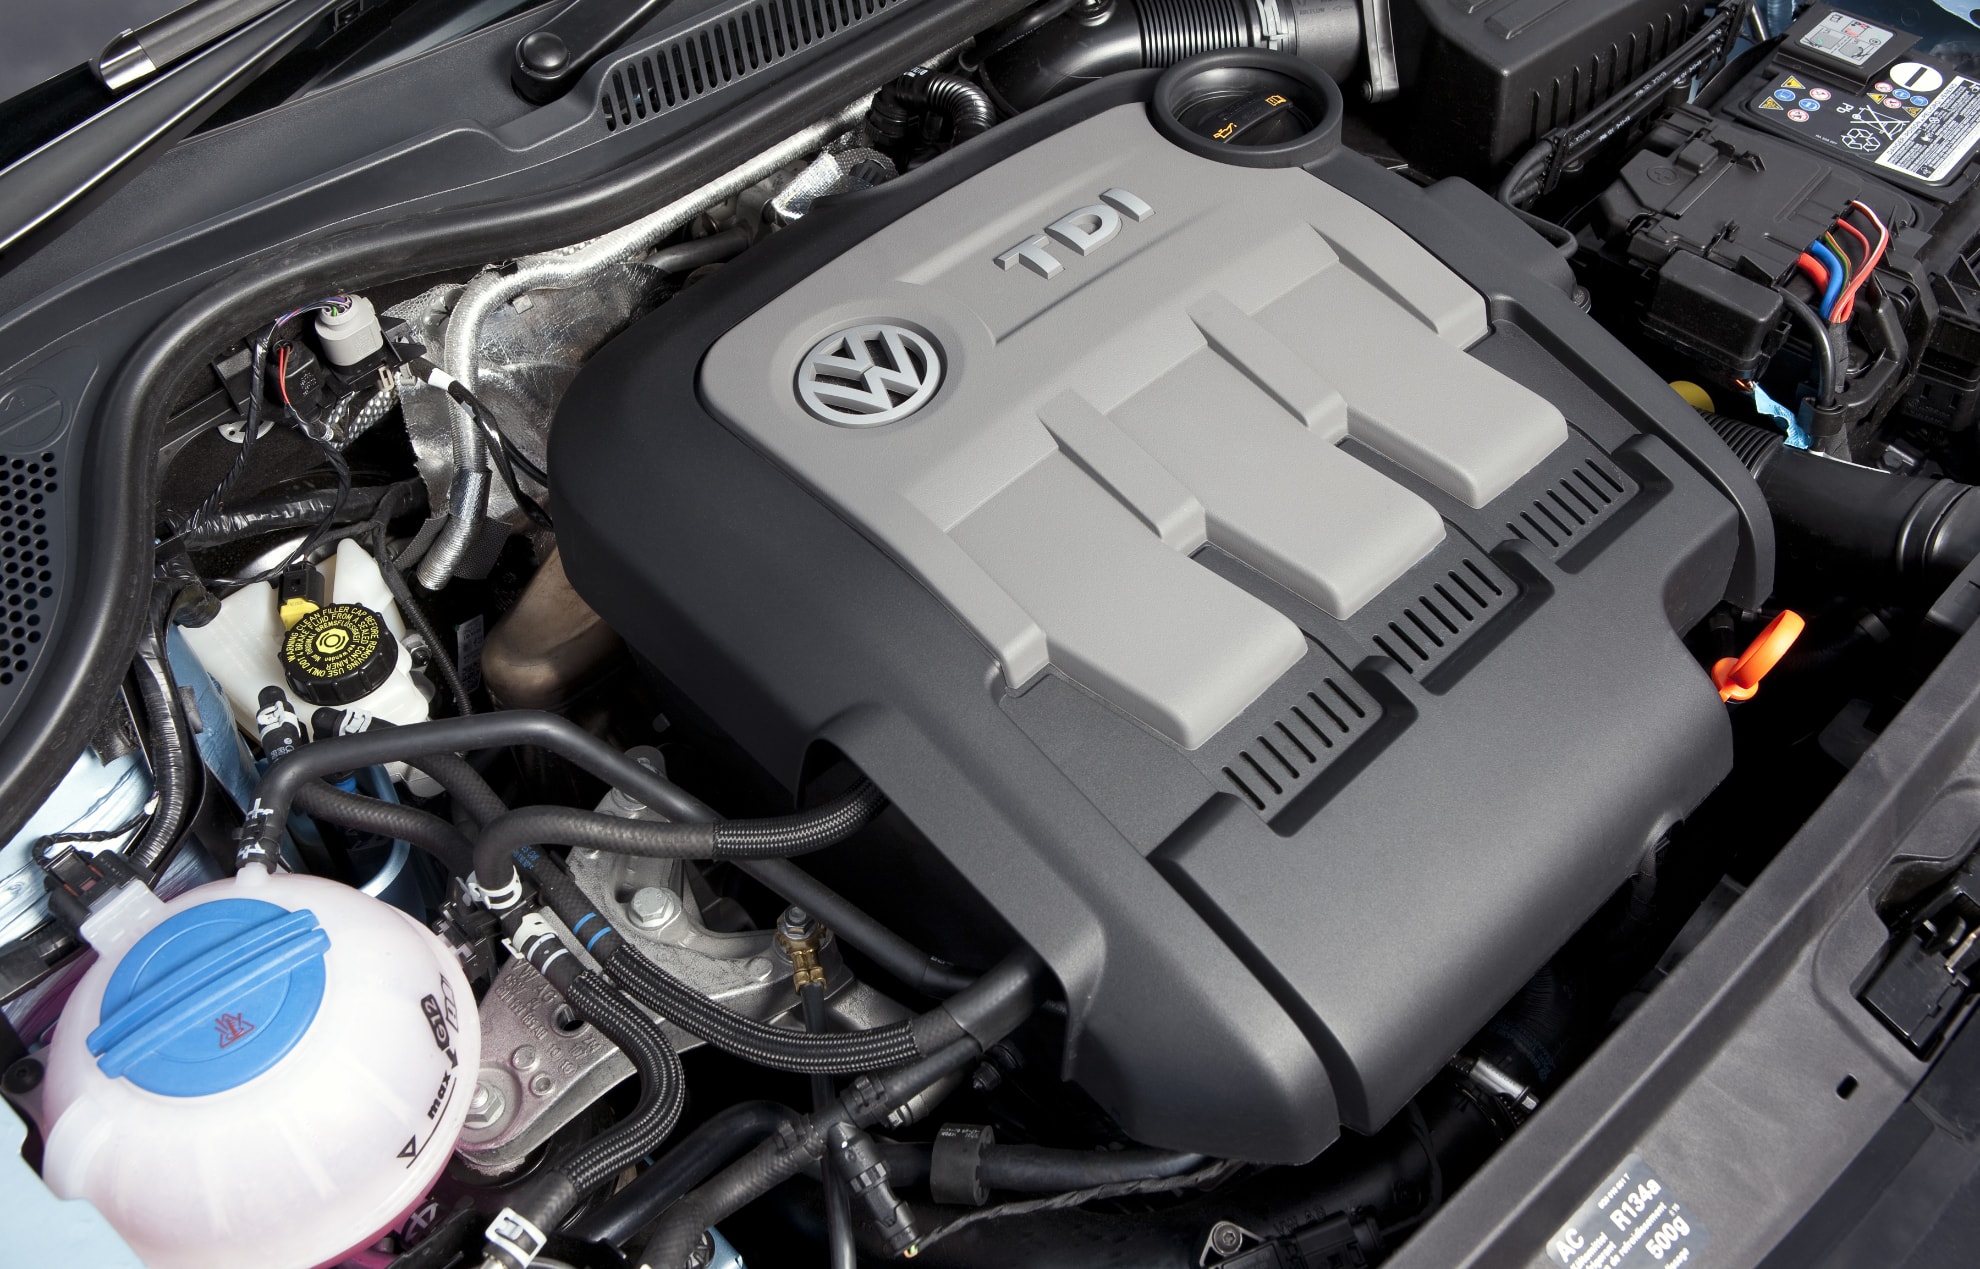 Germany's Transport Authority Approves Volkswagen's Fix For 1.2 TDI ...